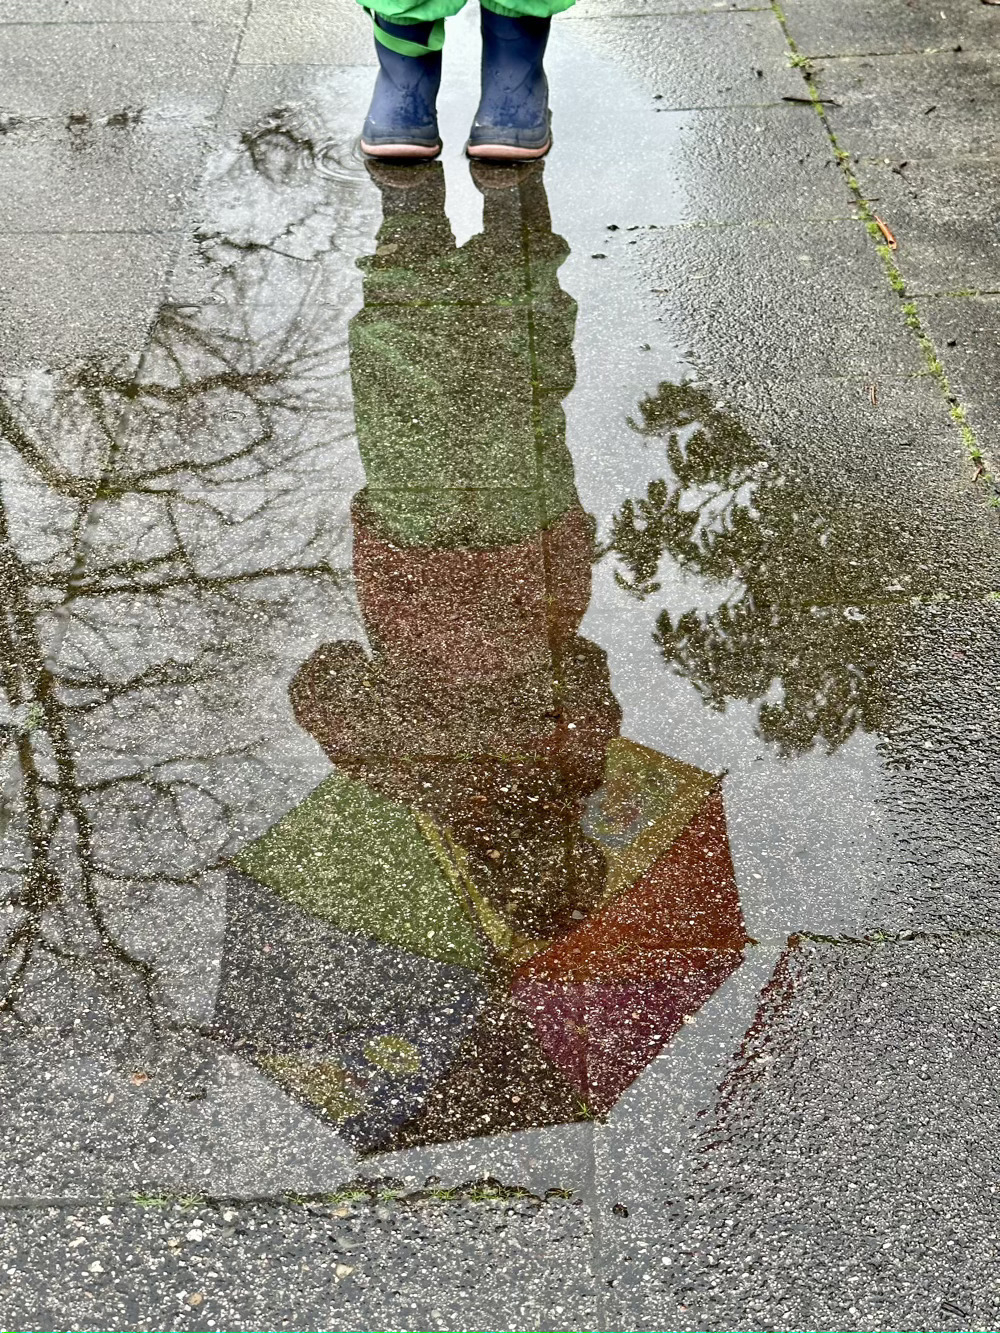 Reflection of little girl standing with an umbrella in a puddle on a sidewalk.